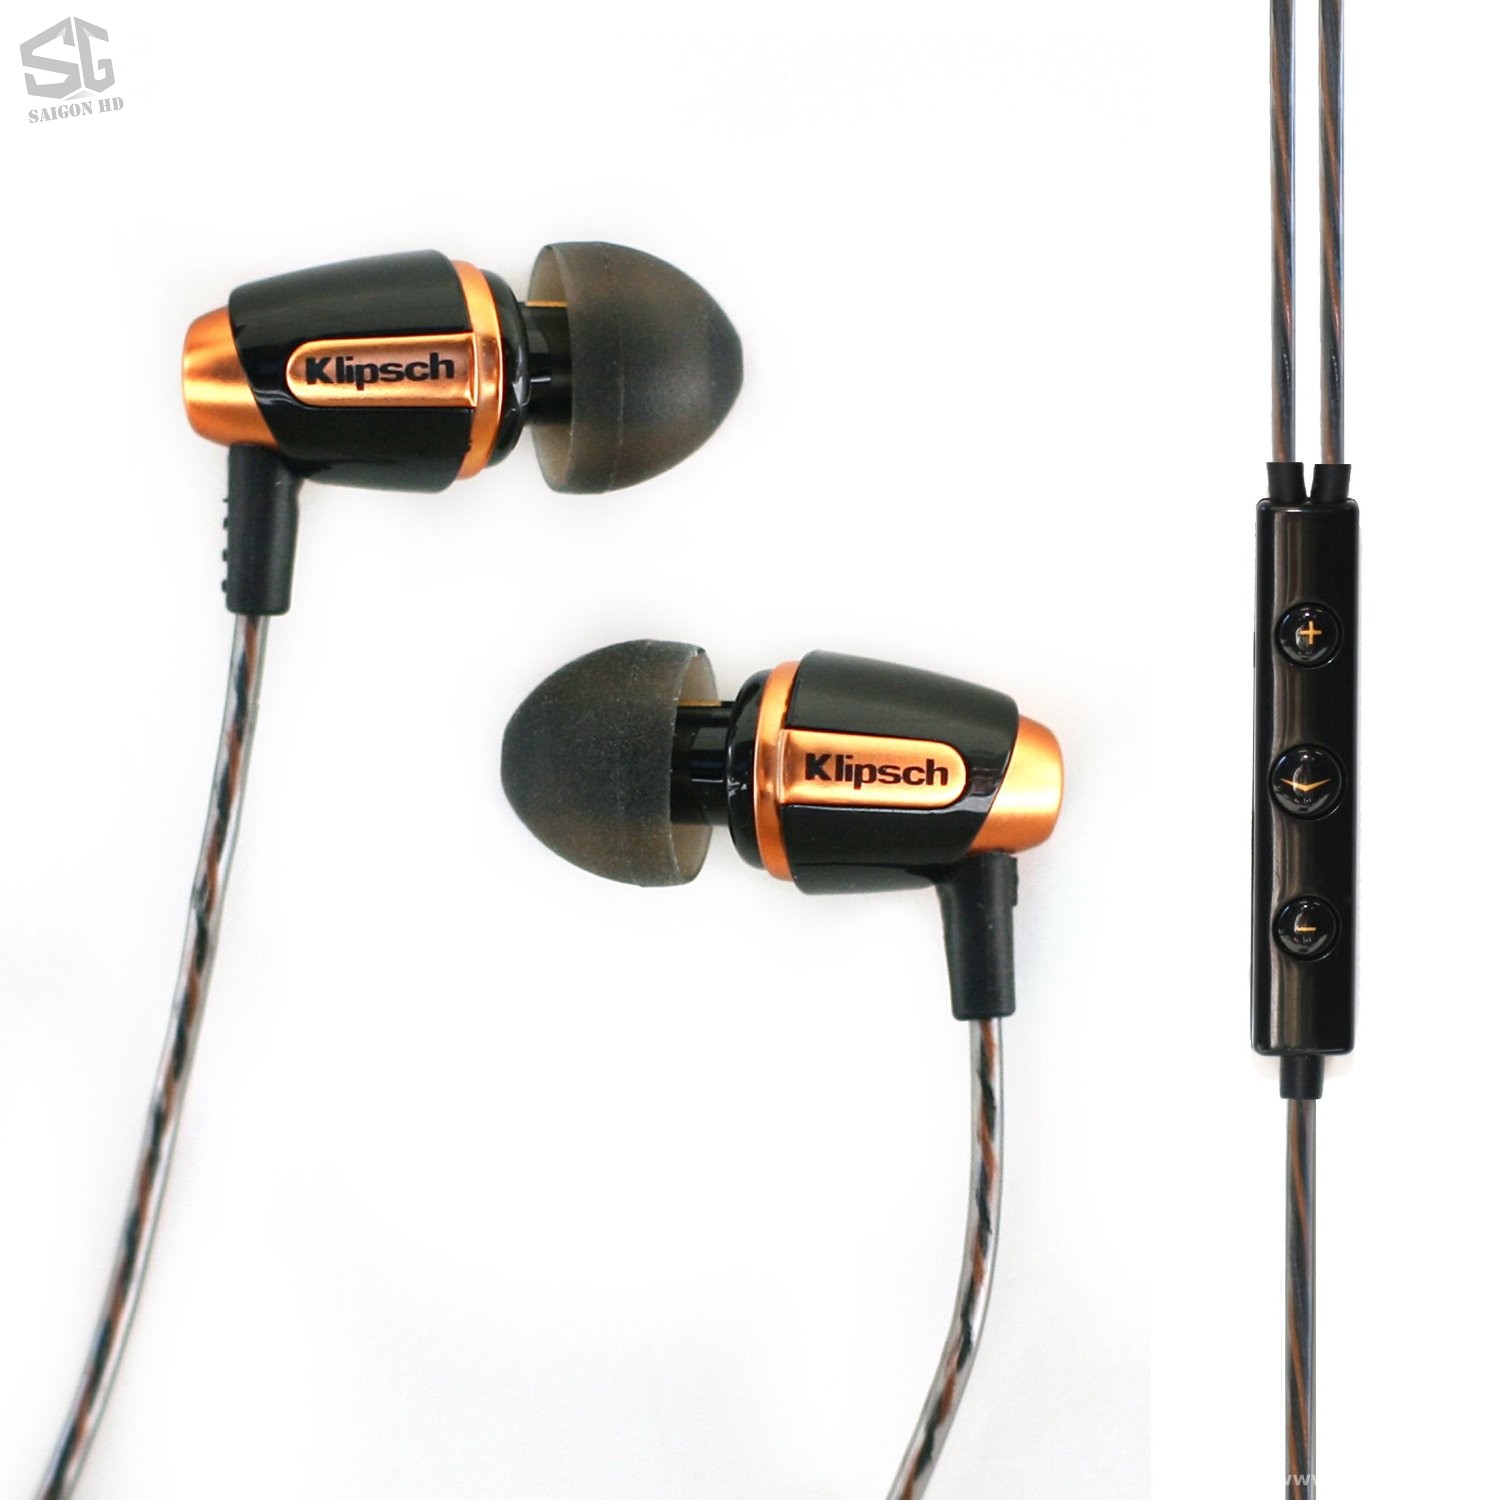 TAI NGHE KLIPSCH REFERENCE S4i BLACK HEADSET